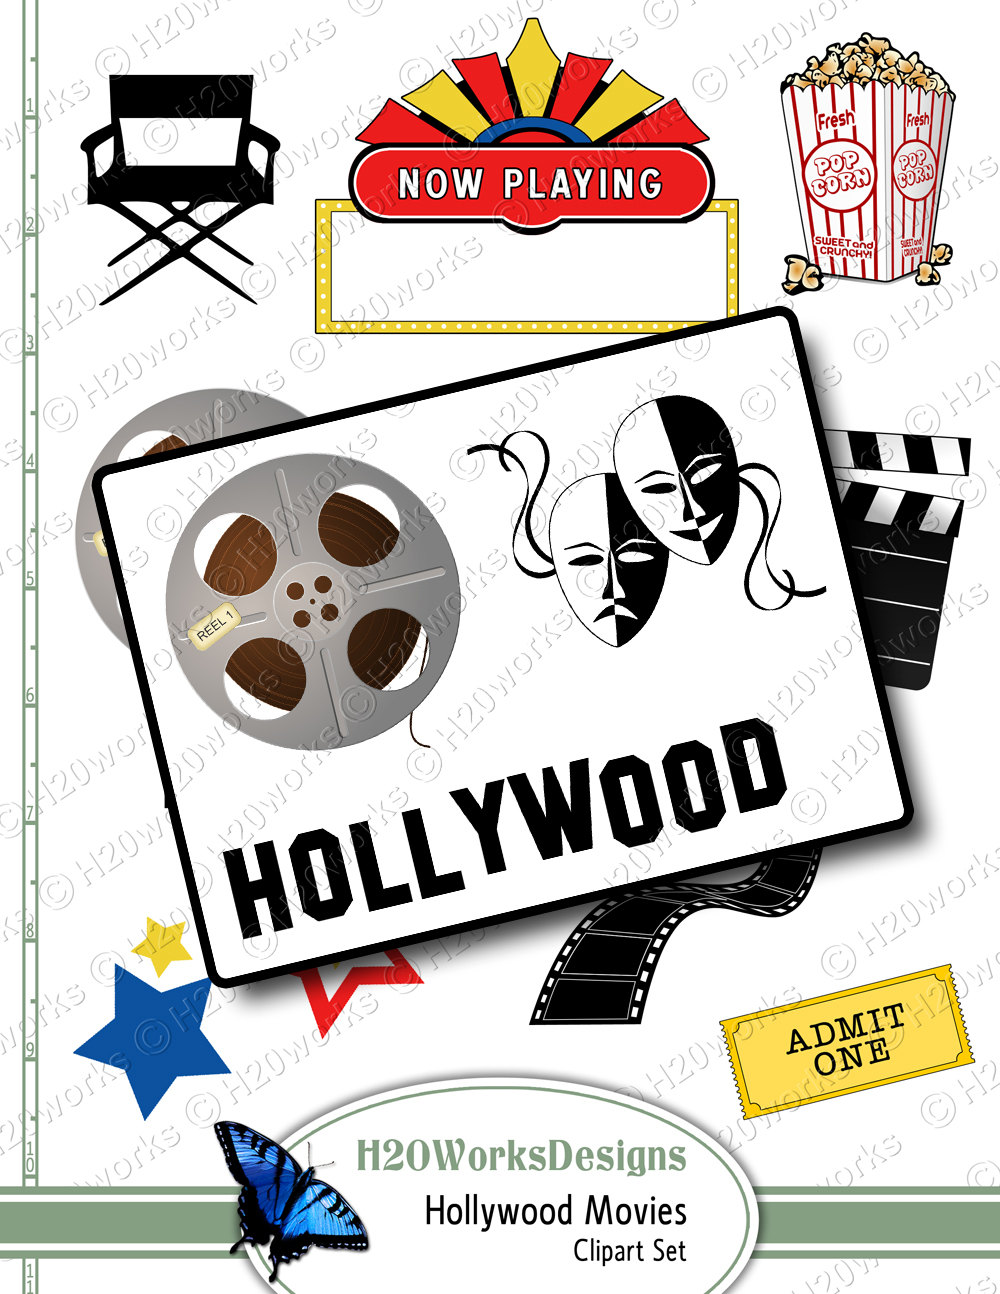 Hollywood Movies Clipart On 8 5x11 Sheet By H20worksdesigns